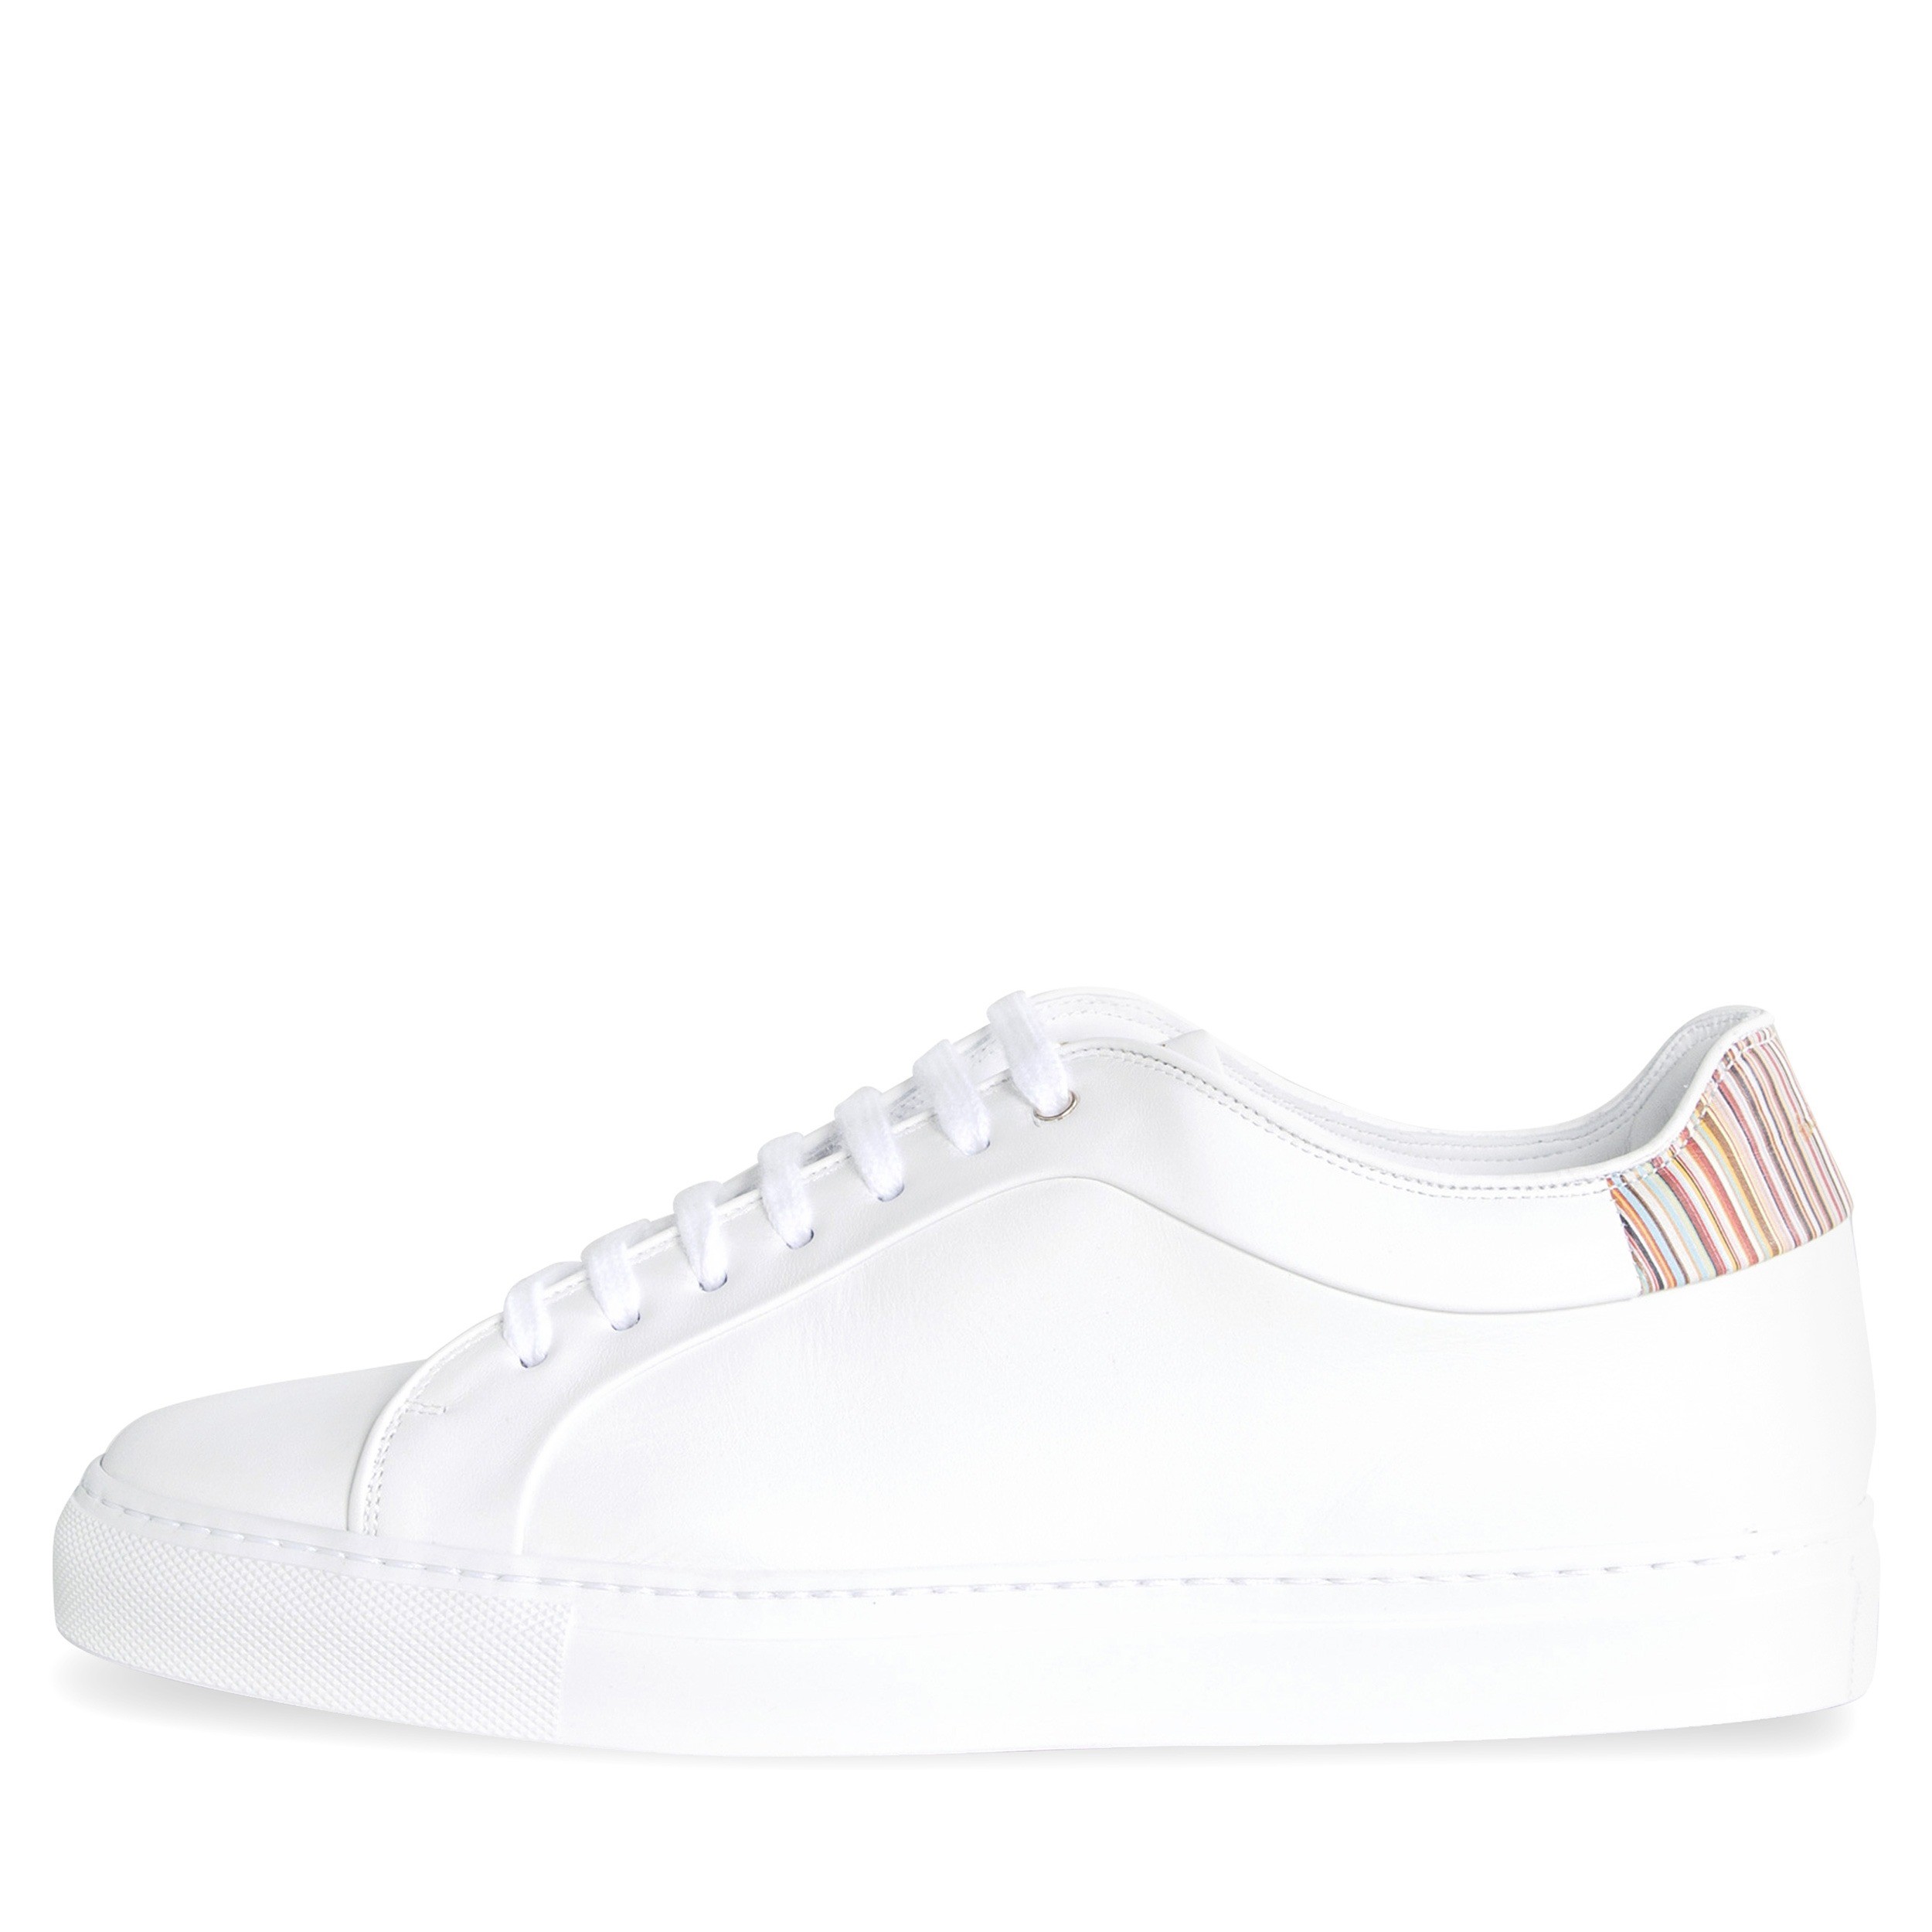 Paul Smith Shoes 'Basso' Trainers With Multi Stripe Heel White